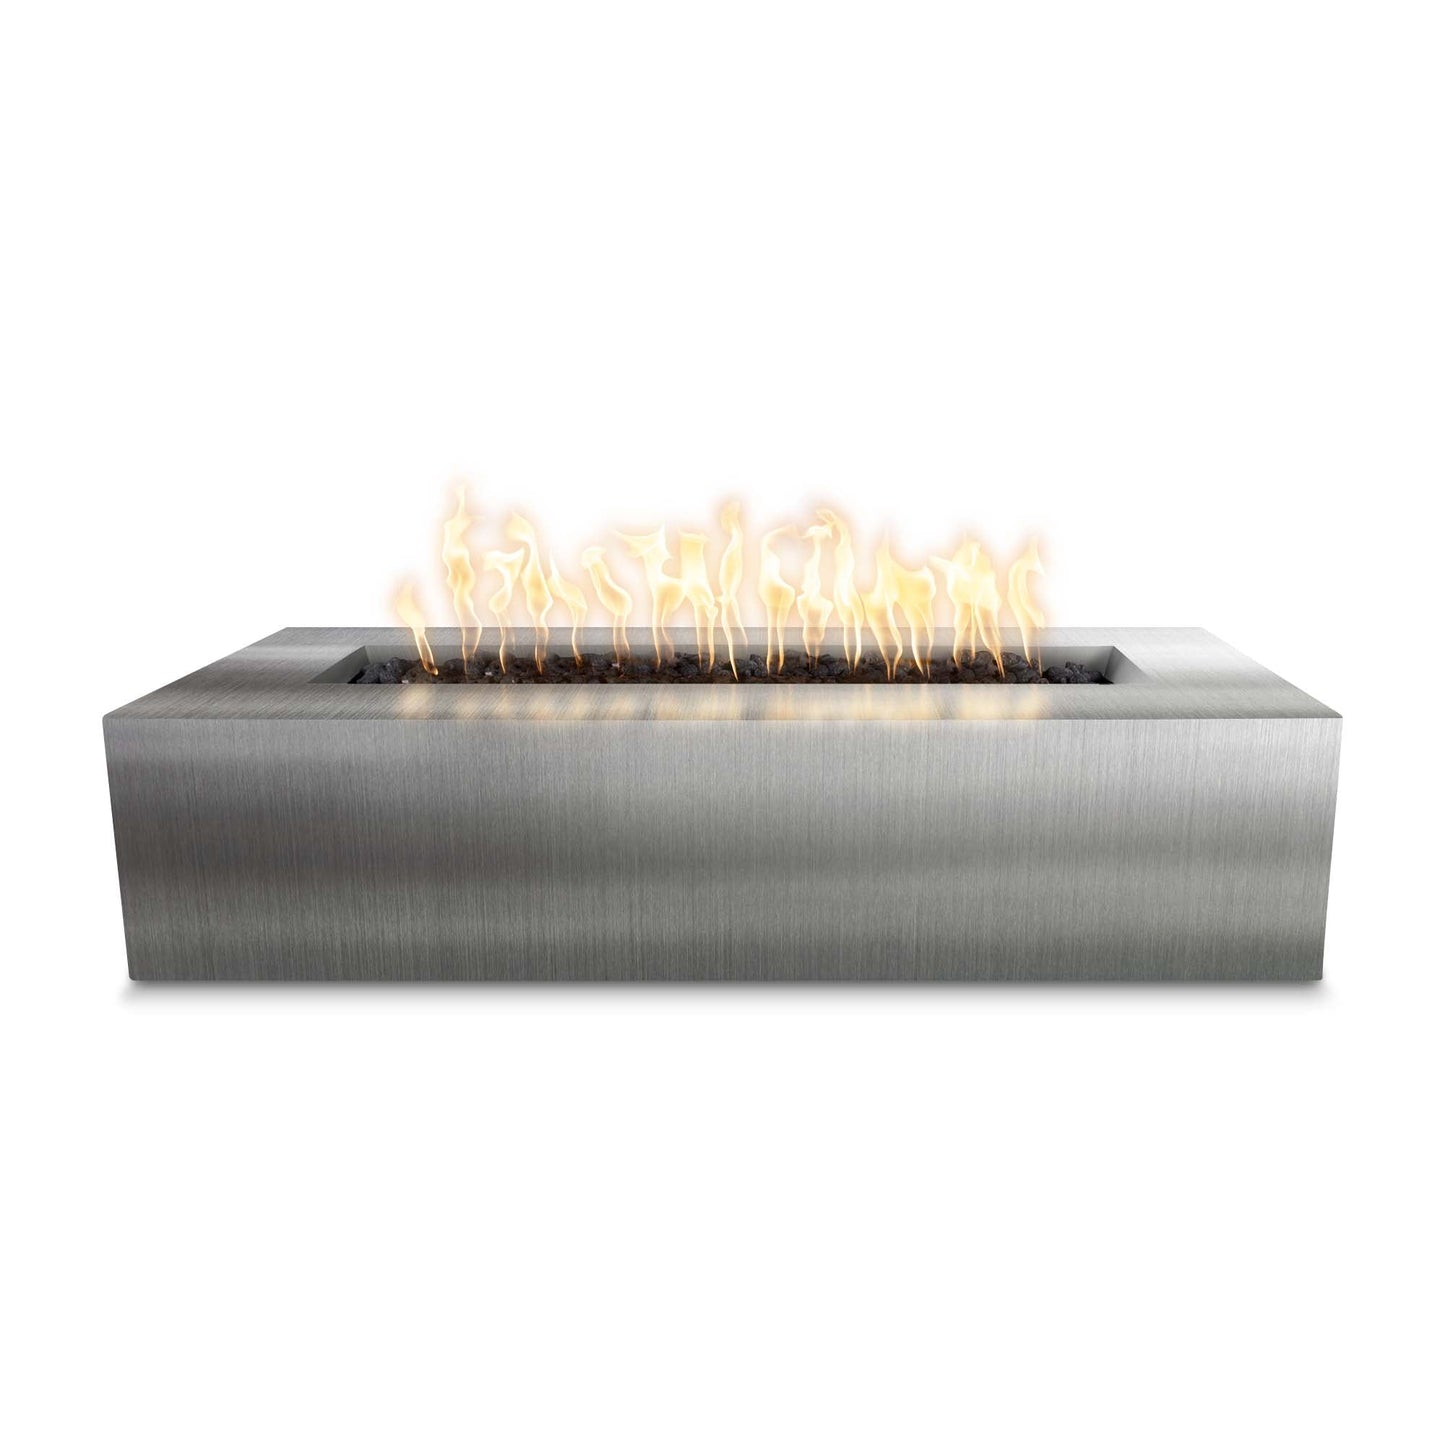 The Outdoor Plus Rectangular Regal 60" Hammered Copper Natural Gas Fire Pit with Match Lit with Flame Sense Ignition